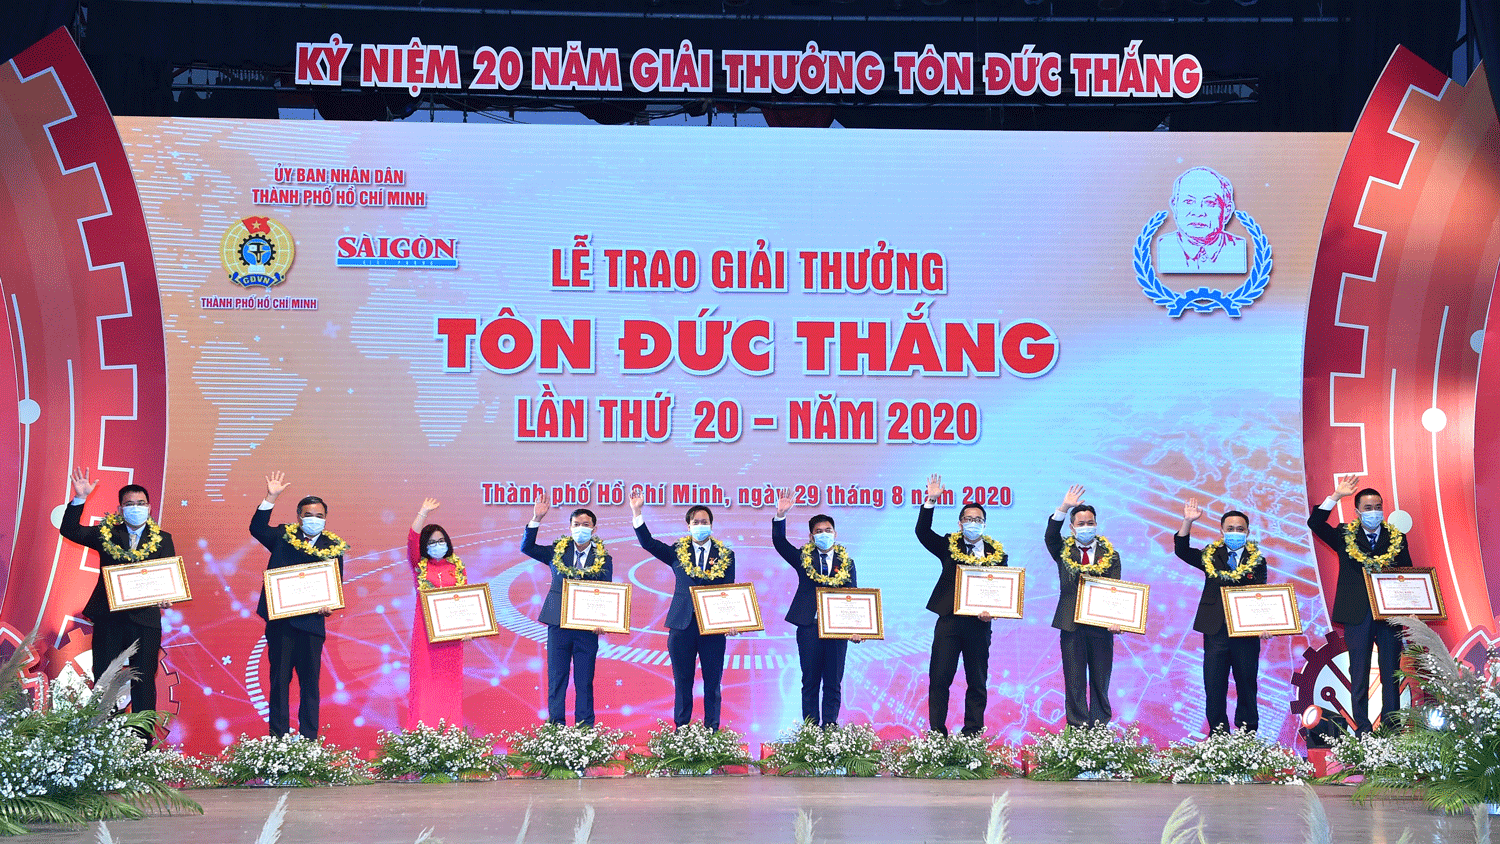 Winners of the 20th Ton Duc Thang Awards (Photo: SGGP)